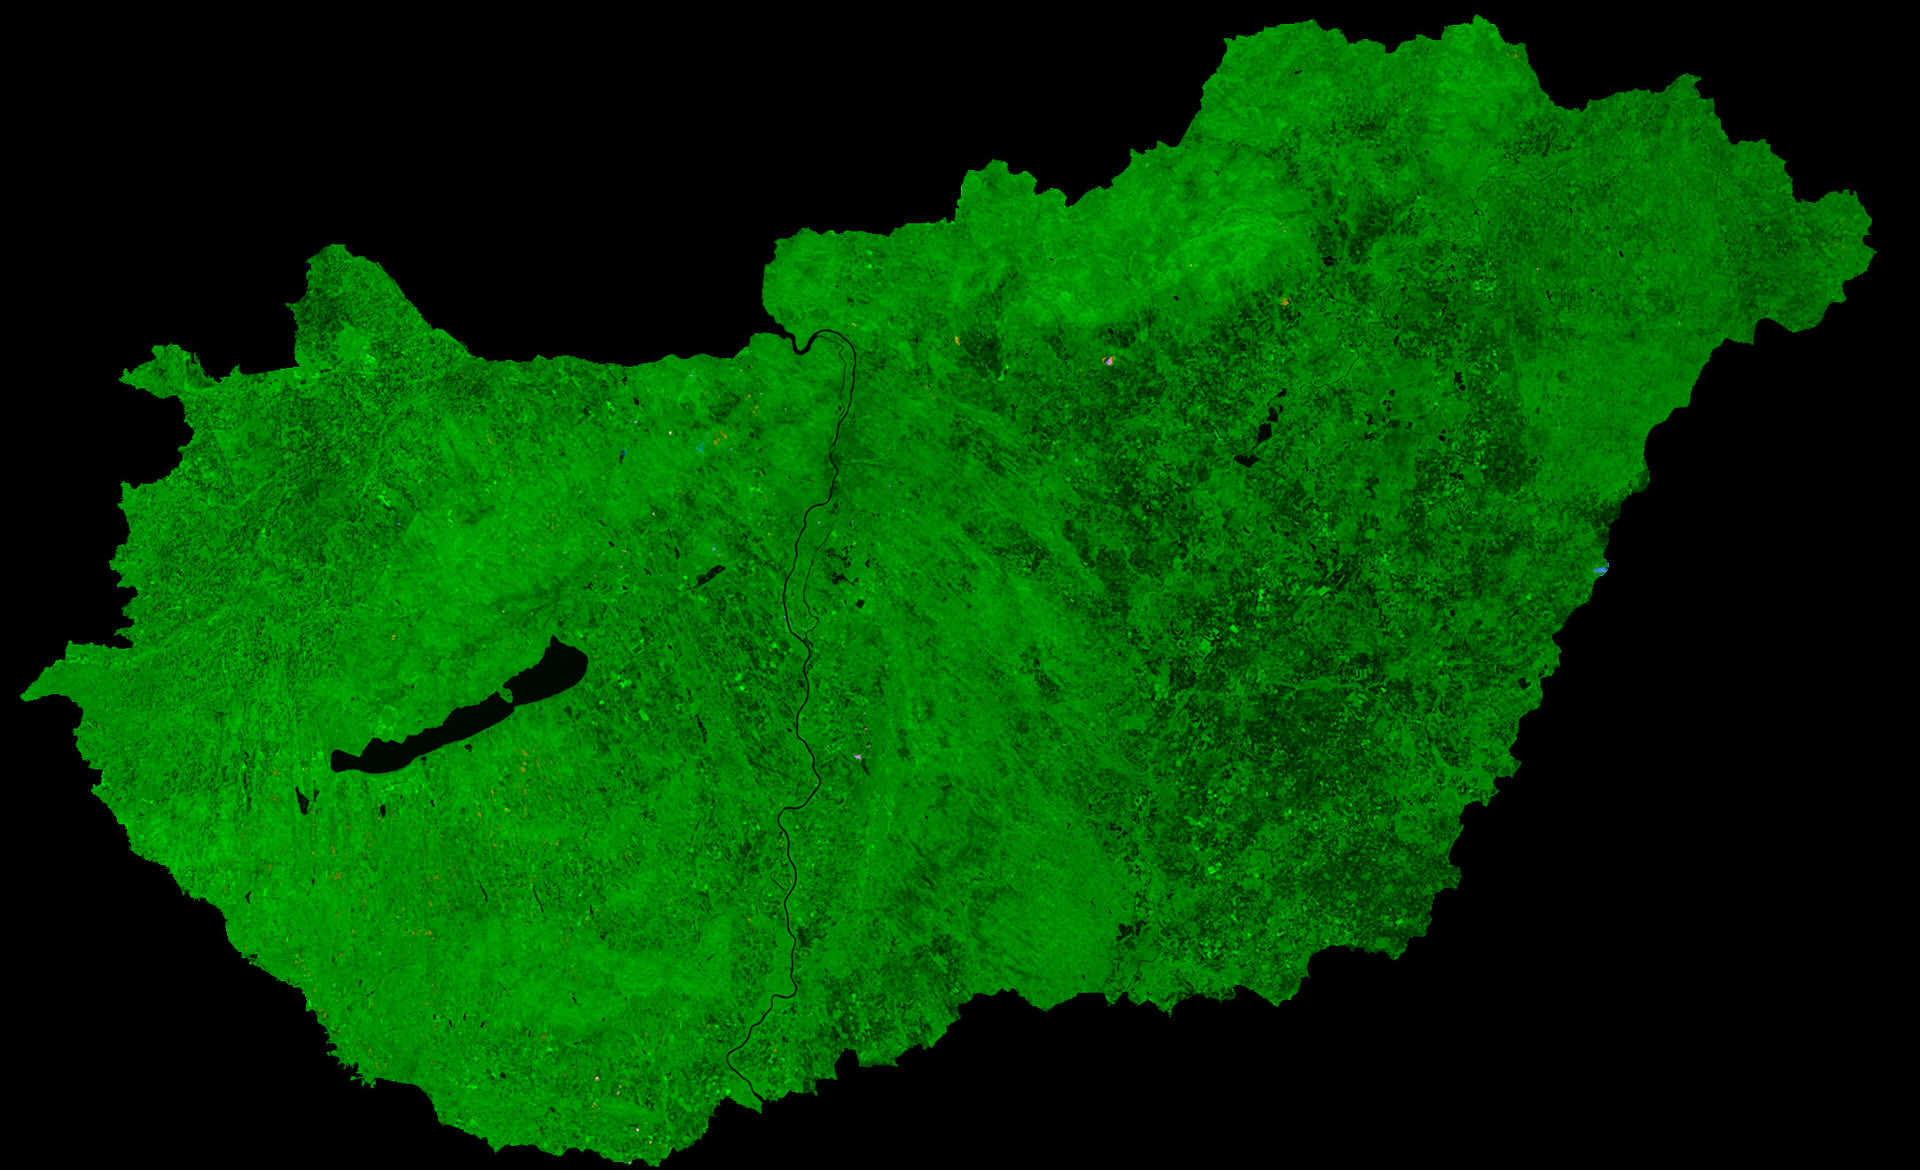 A cloud-free image of Hungary, acquired by ESA's Proba-V satellite